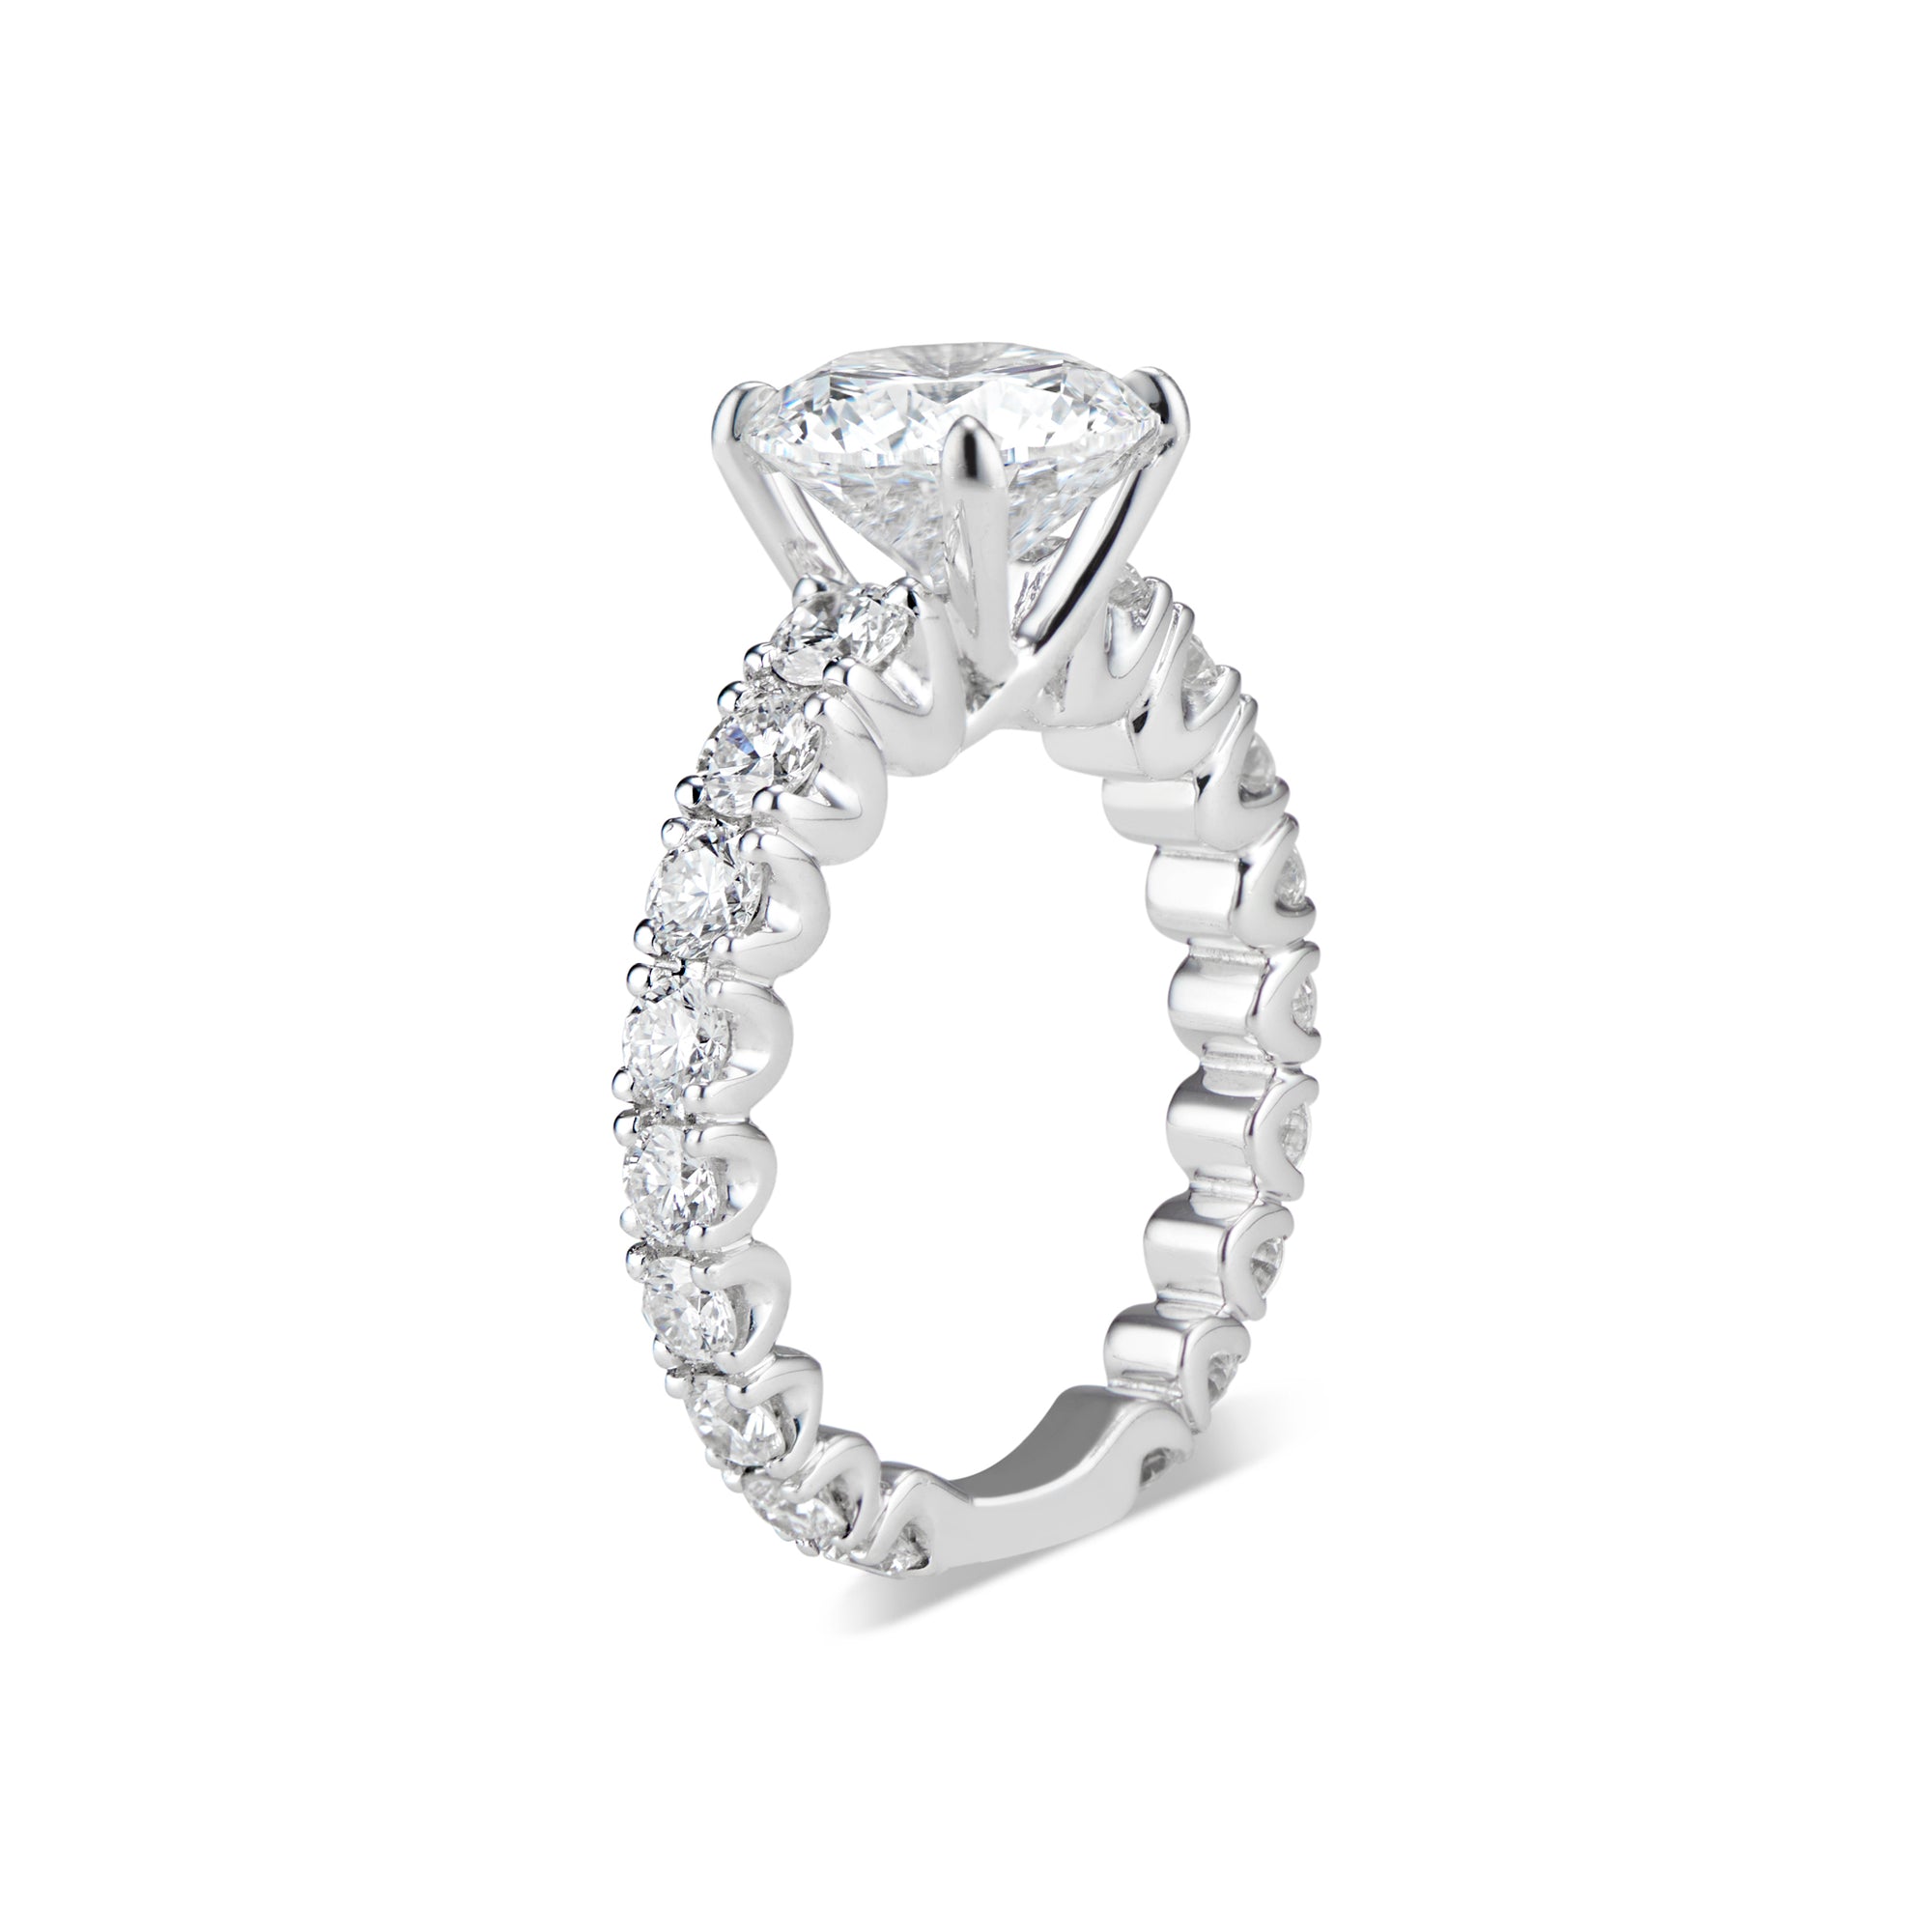 Round Diamond Engagement Ring with Diamond Band  -18K Weighting 5.34GR  - 18 round diamonds totaling 1.87 carats